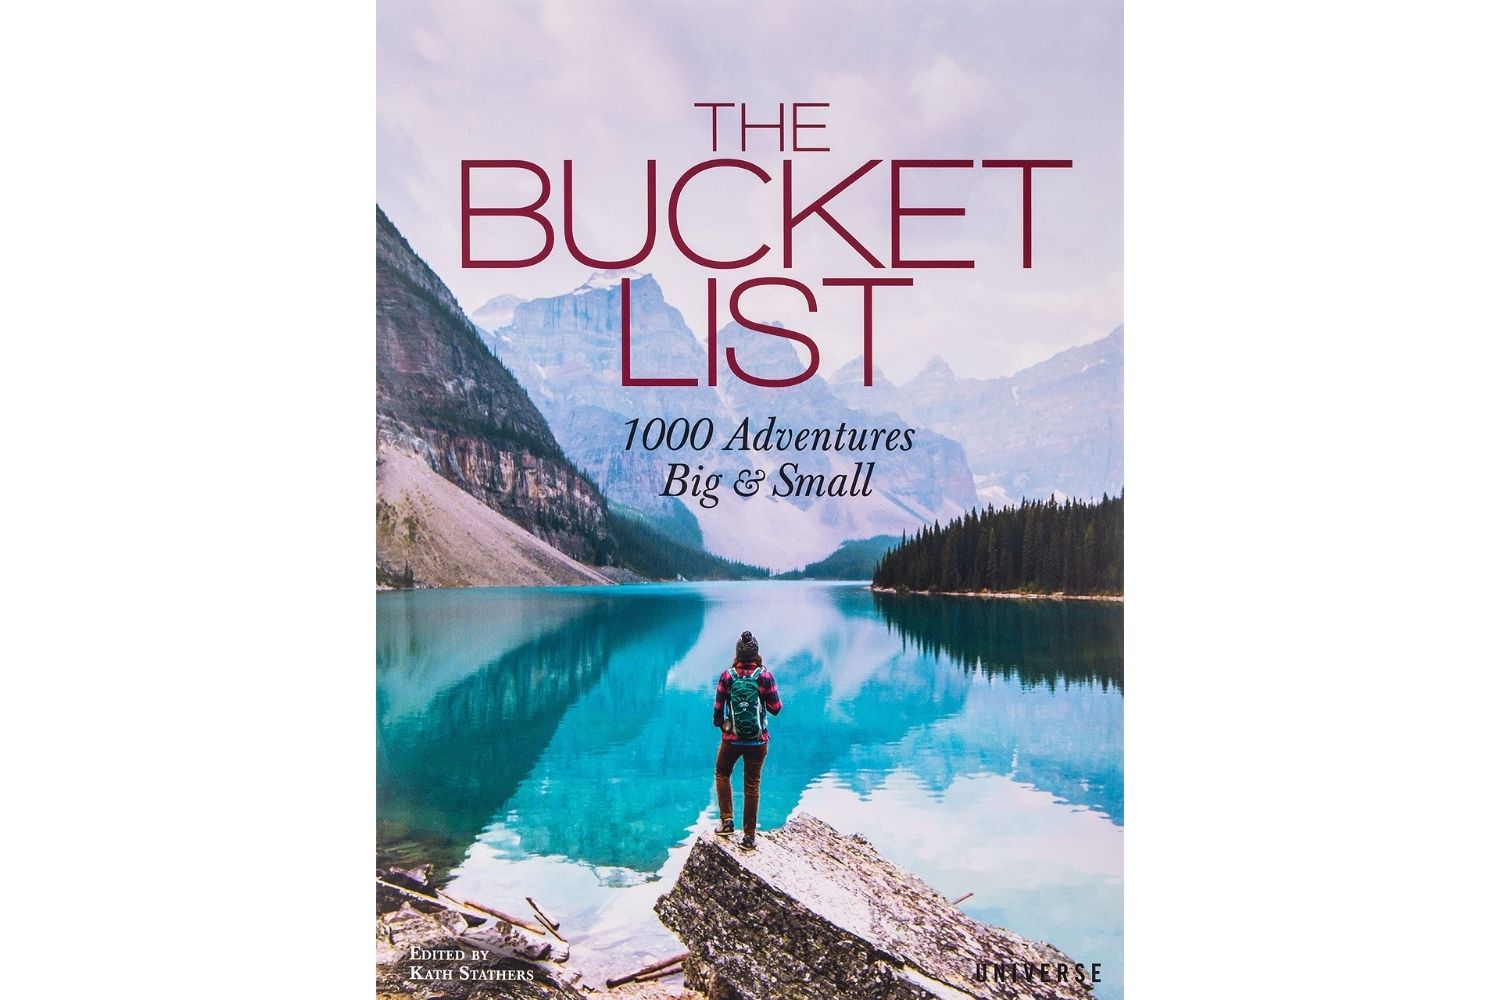 The Best Travel Gifts Option: The Bucket List: 1000 Adventures Big & Small by Kath Stathers